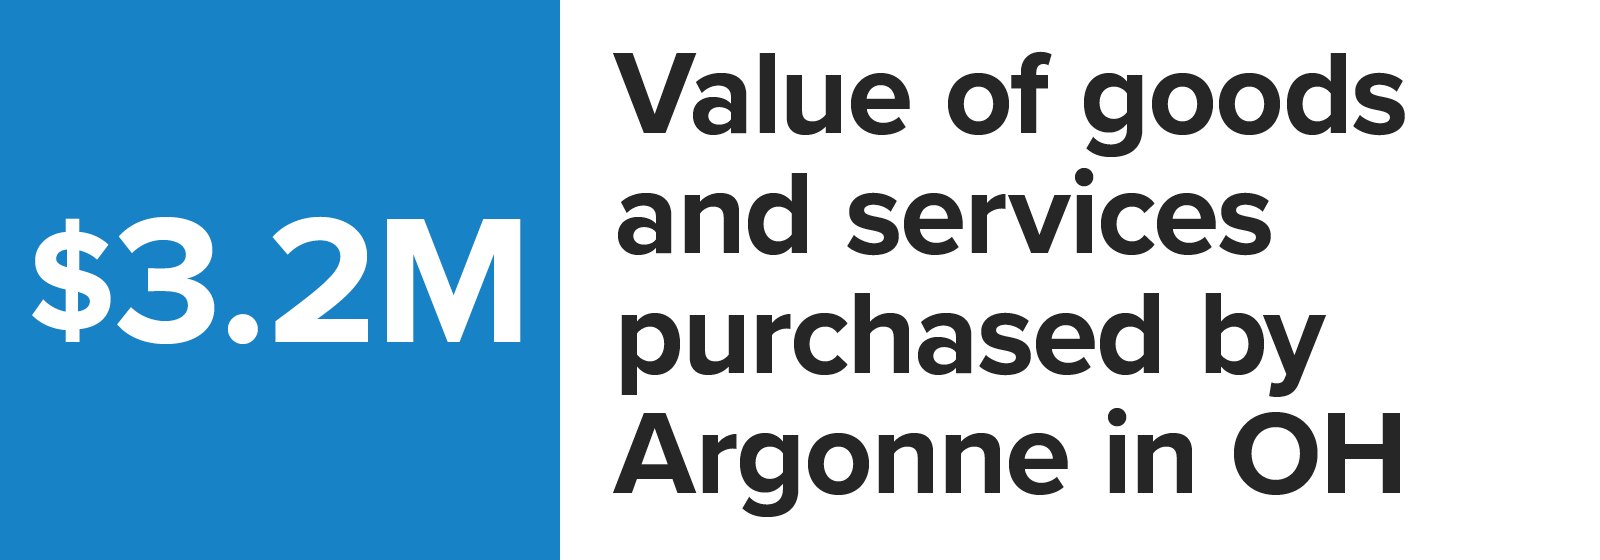 Number graphic value of goods and services purchased by Argonne in Ohio